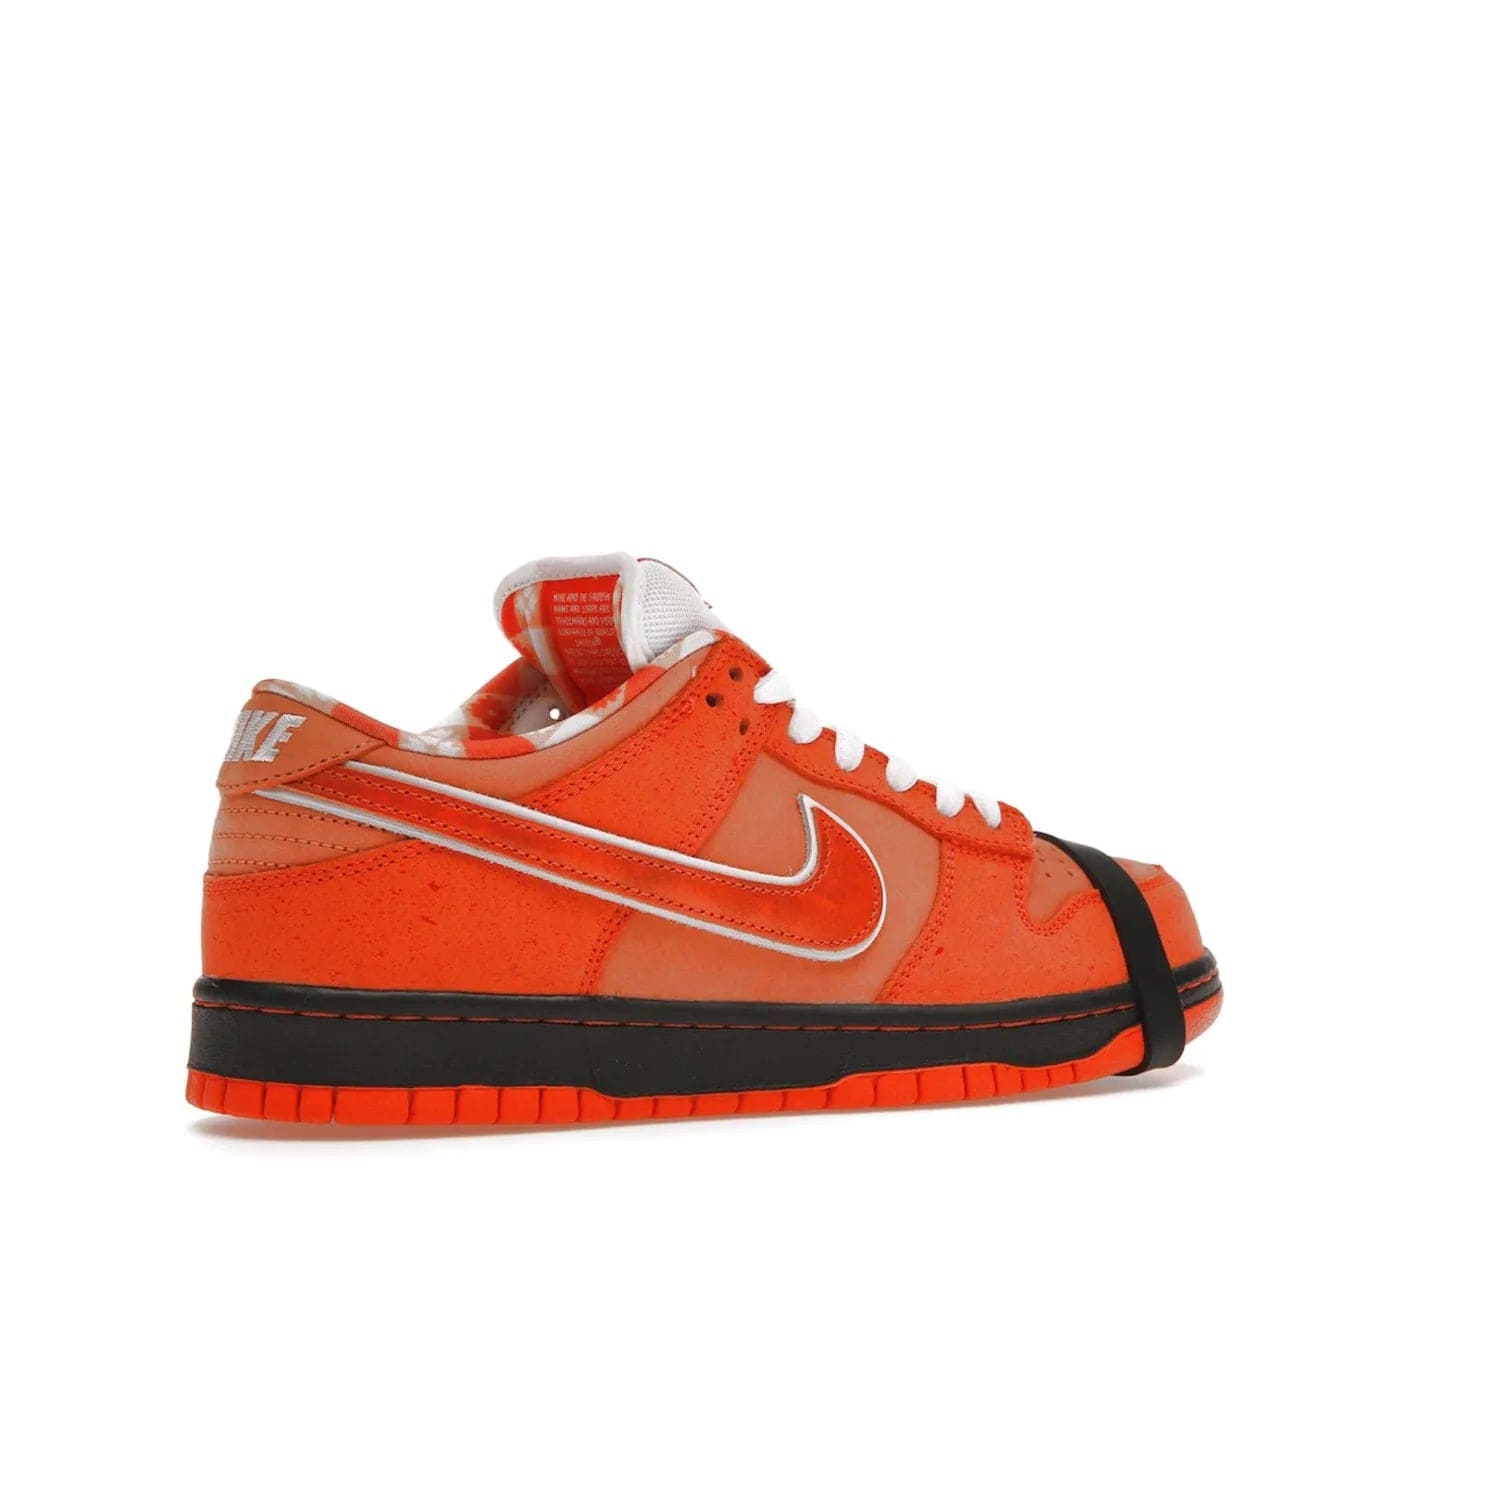 Nike SB Dunk Low Concepts Orange Lobster - Image 34 - Only at www.BallersClubKickz.com - Make a statement with the Nike SB Dunk Low Concepts Orange Lobster. Variety of orange hues, nubuck upper, bib-inspired lining & rubber outsole create bold look & comfortable blend of style. Available December 20th, 2022.